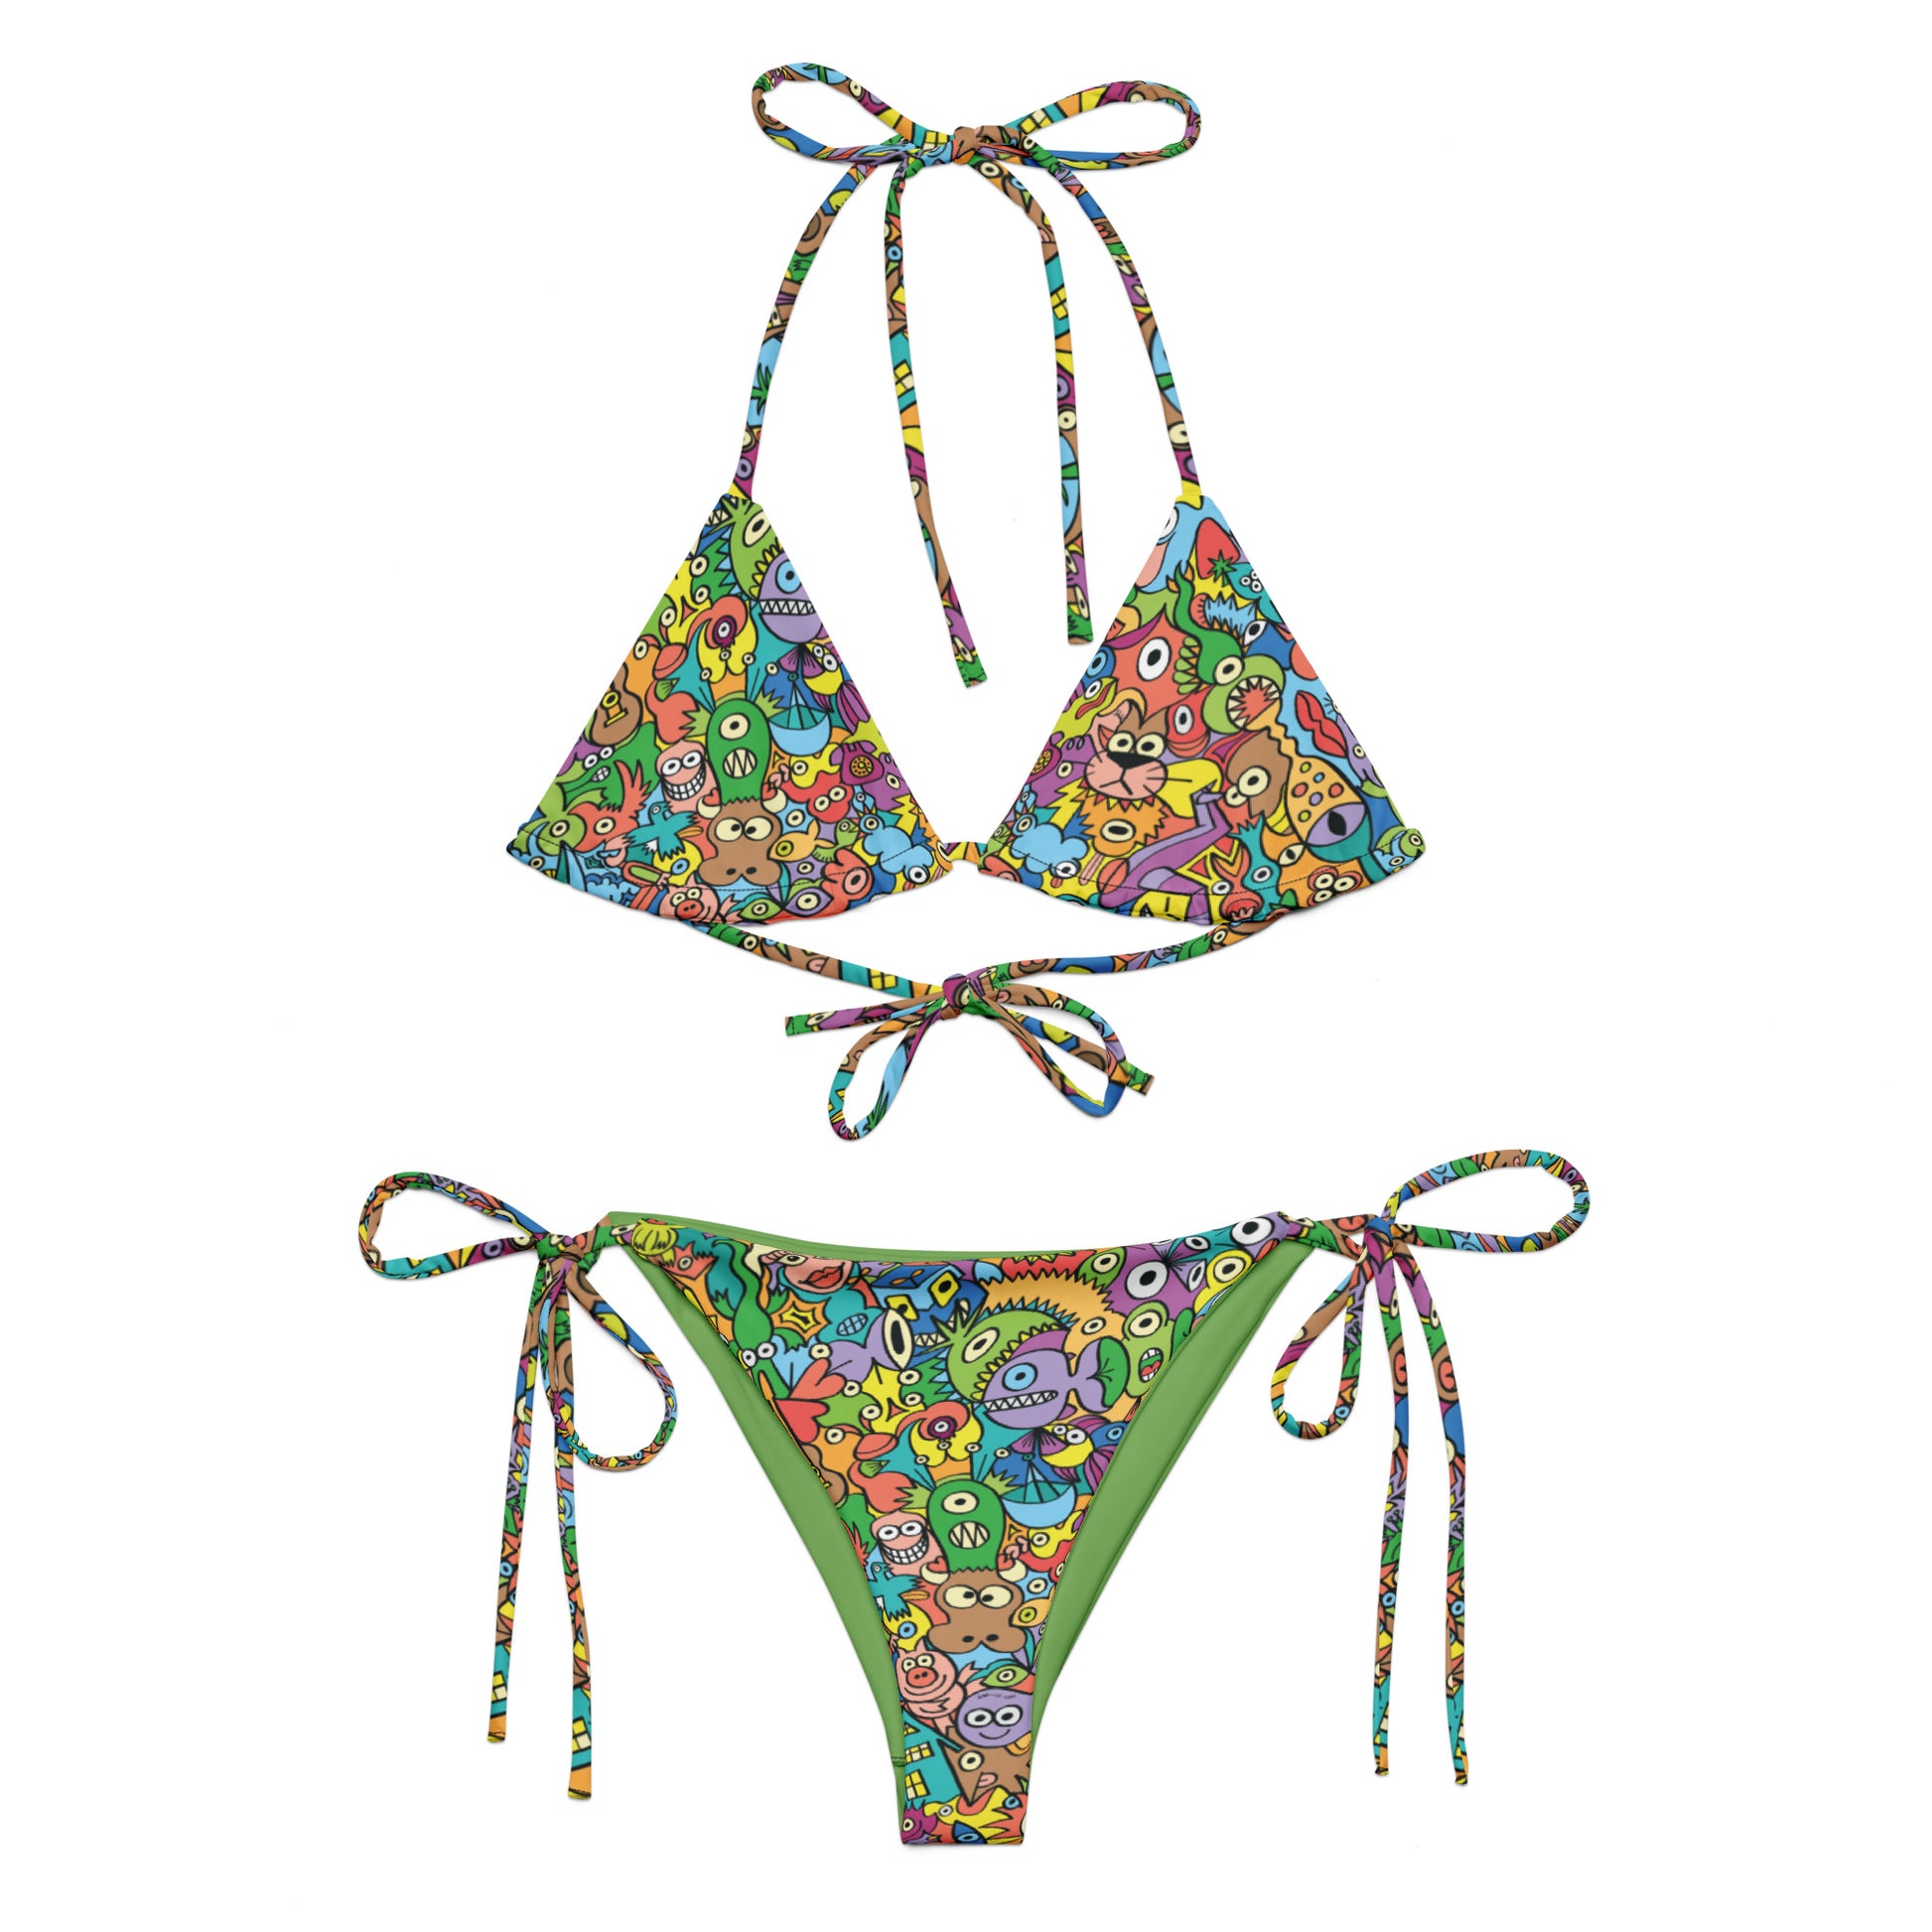 Cheerful crowd enjoying a lively carnival All-over print recycled string bikini. Flat view